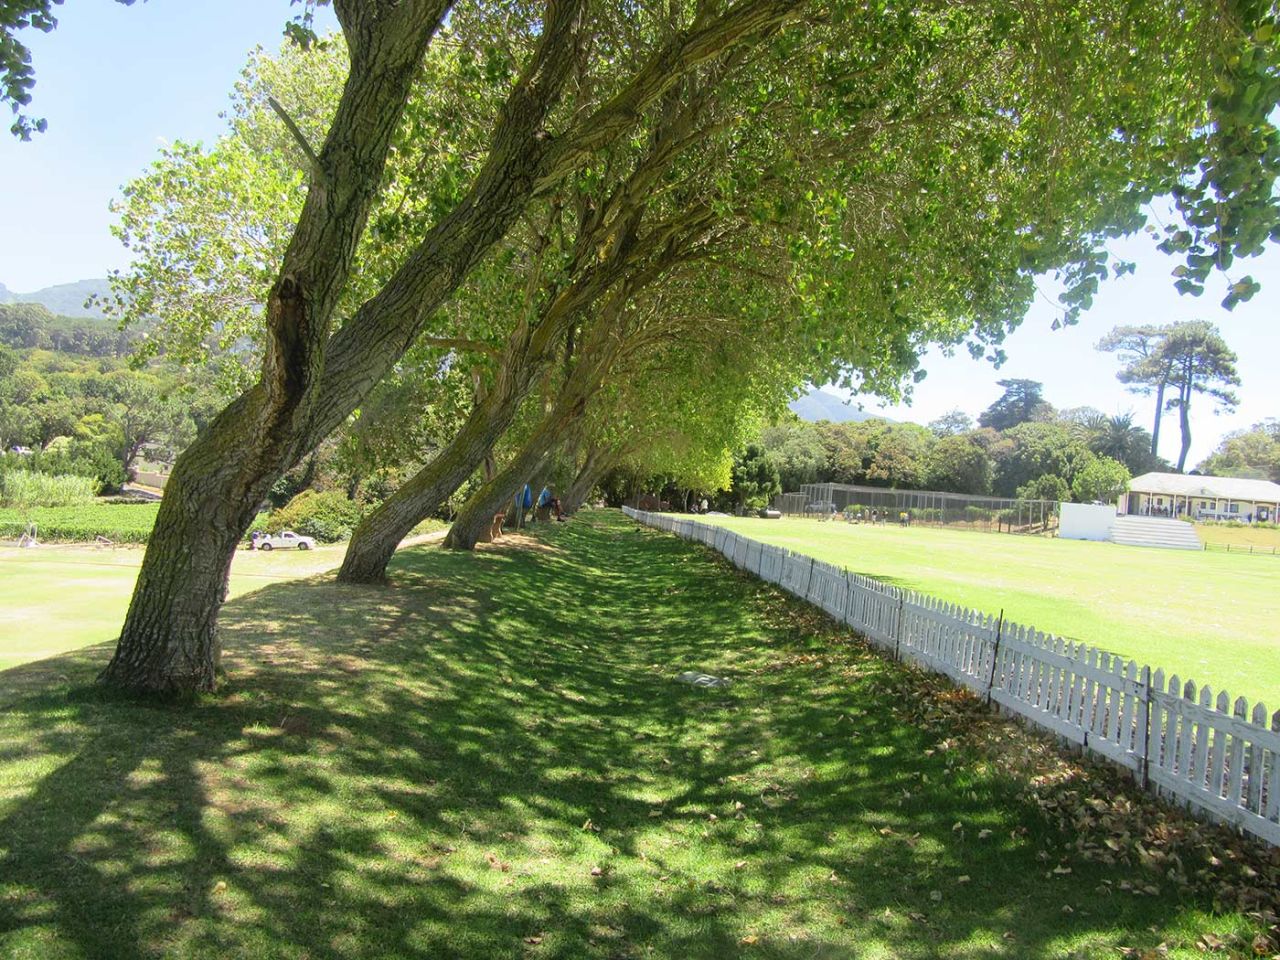 A view of the poplar-lined boundary at the Jacques Kallis Oval, Wynberg Boys High School, Cape Town, February 2018